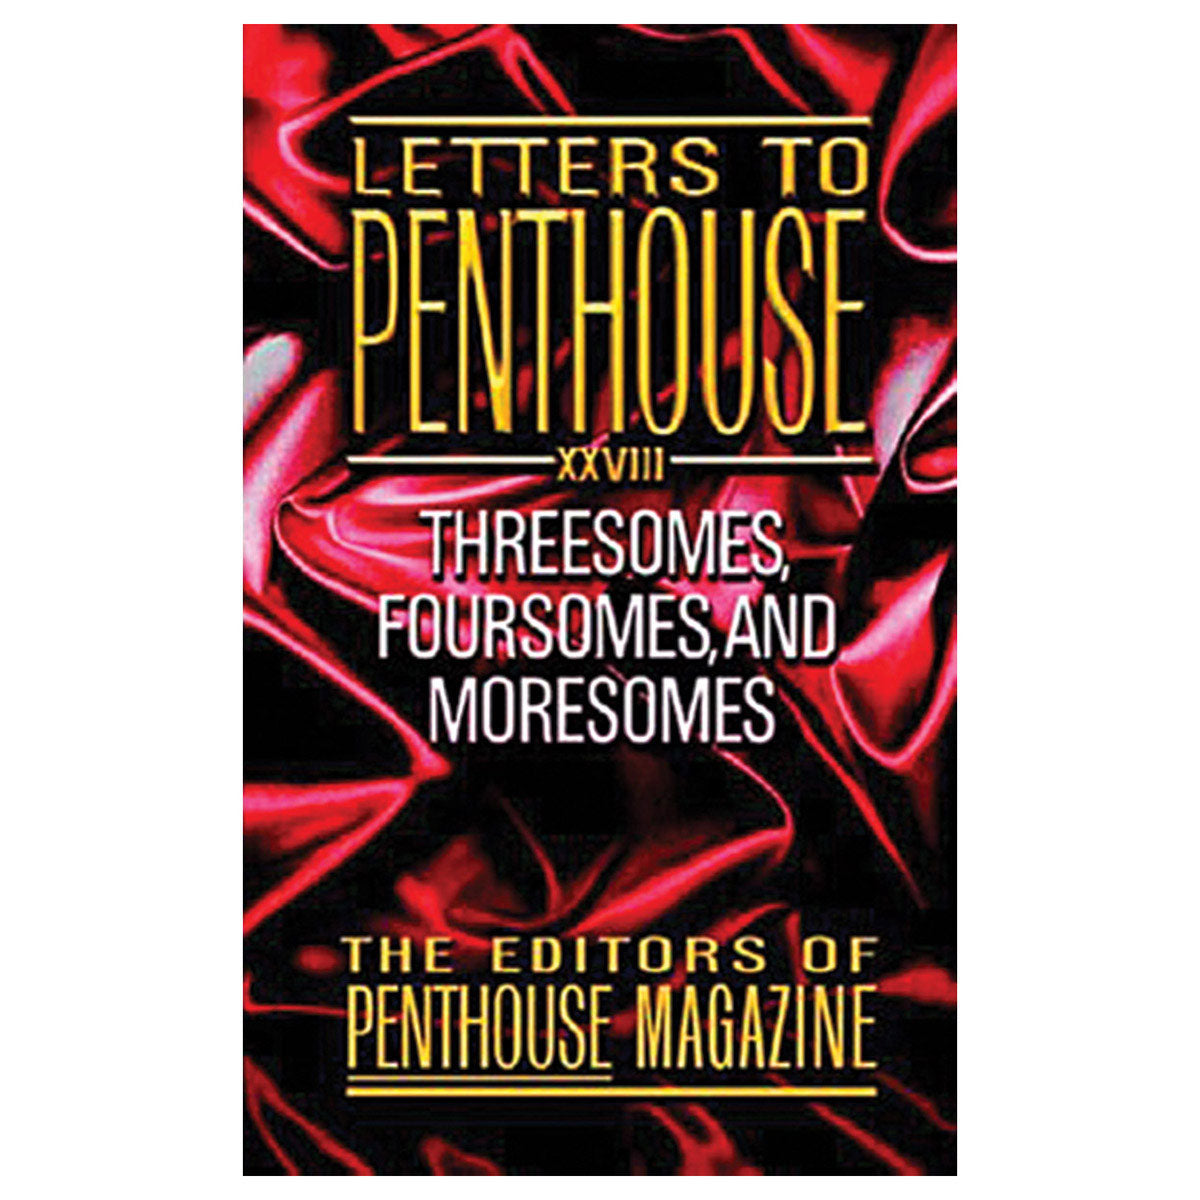 Letters to Penthouse XXVIII - Threesomes, Foursomes, and Moresomes - Warner Books